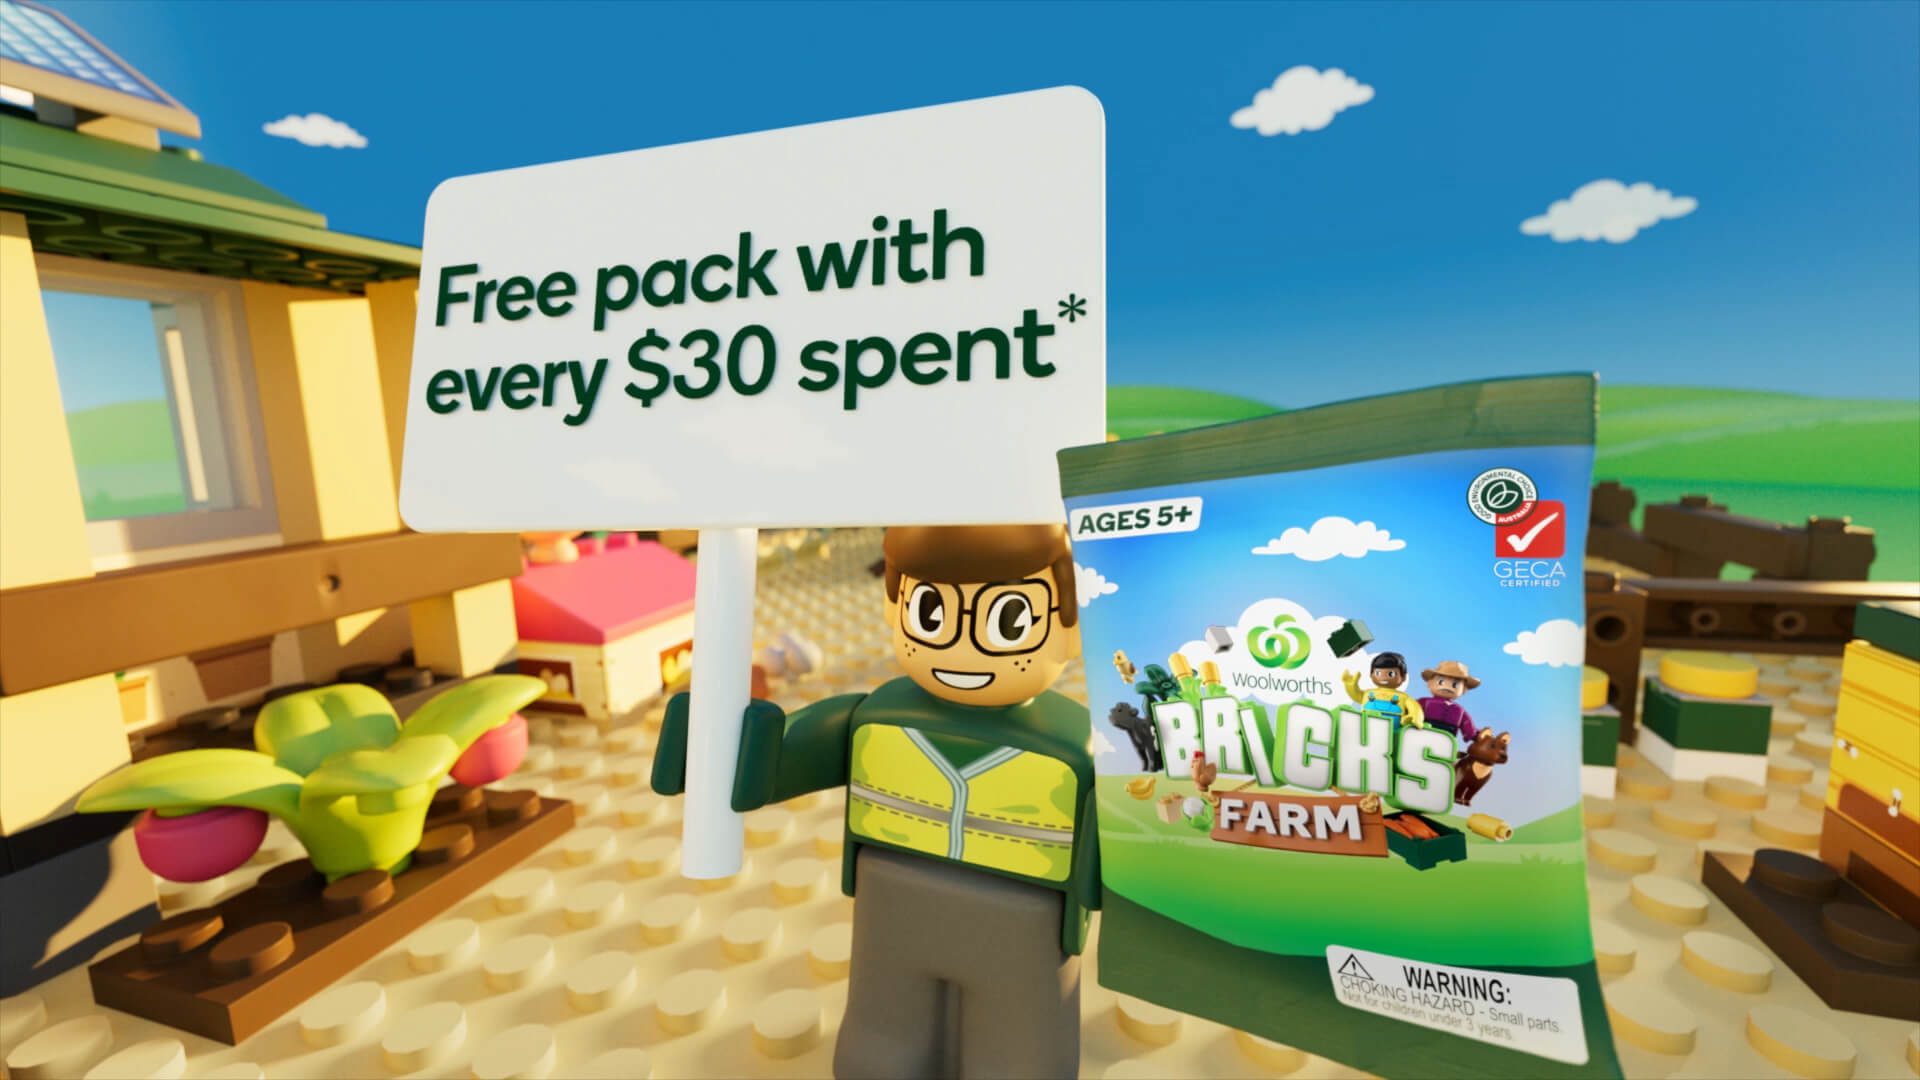 Image showing Woolworths Bricks Farm motion graphics animation frame with text saying free pack with every $30 spent.